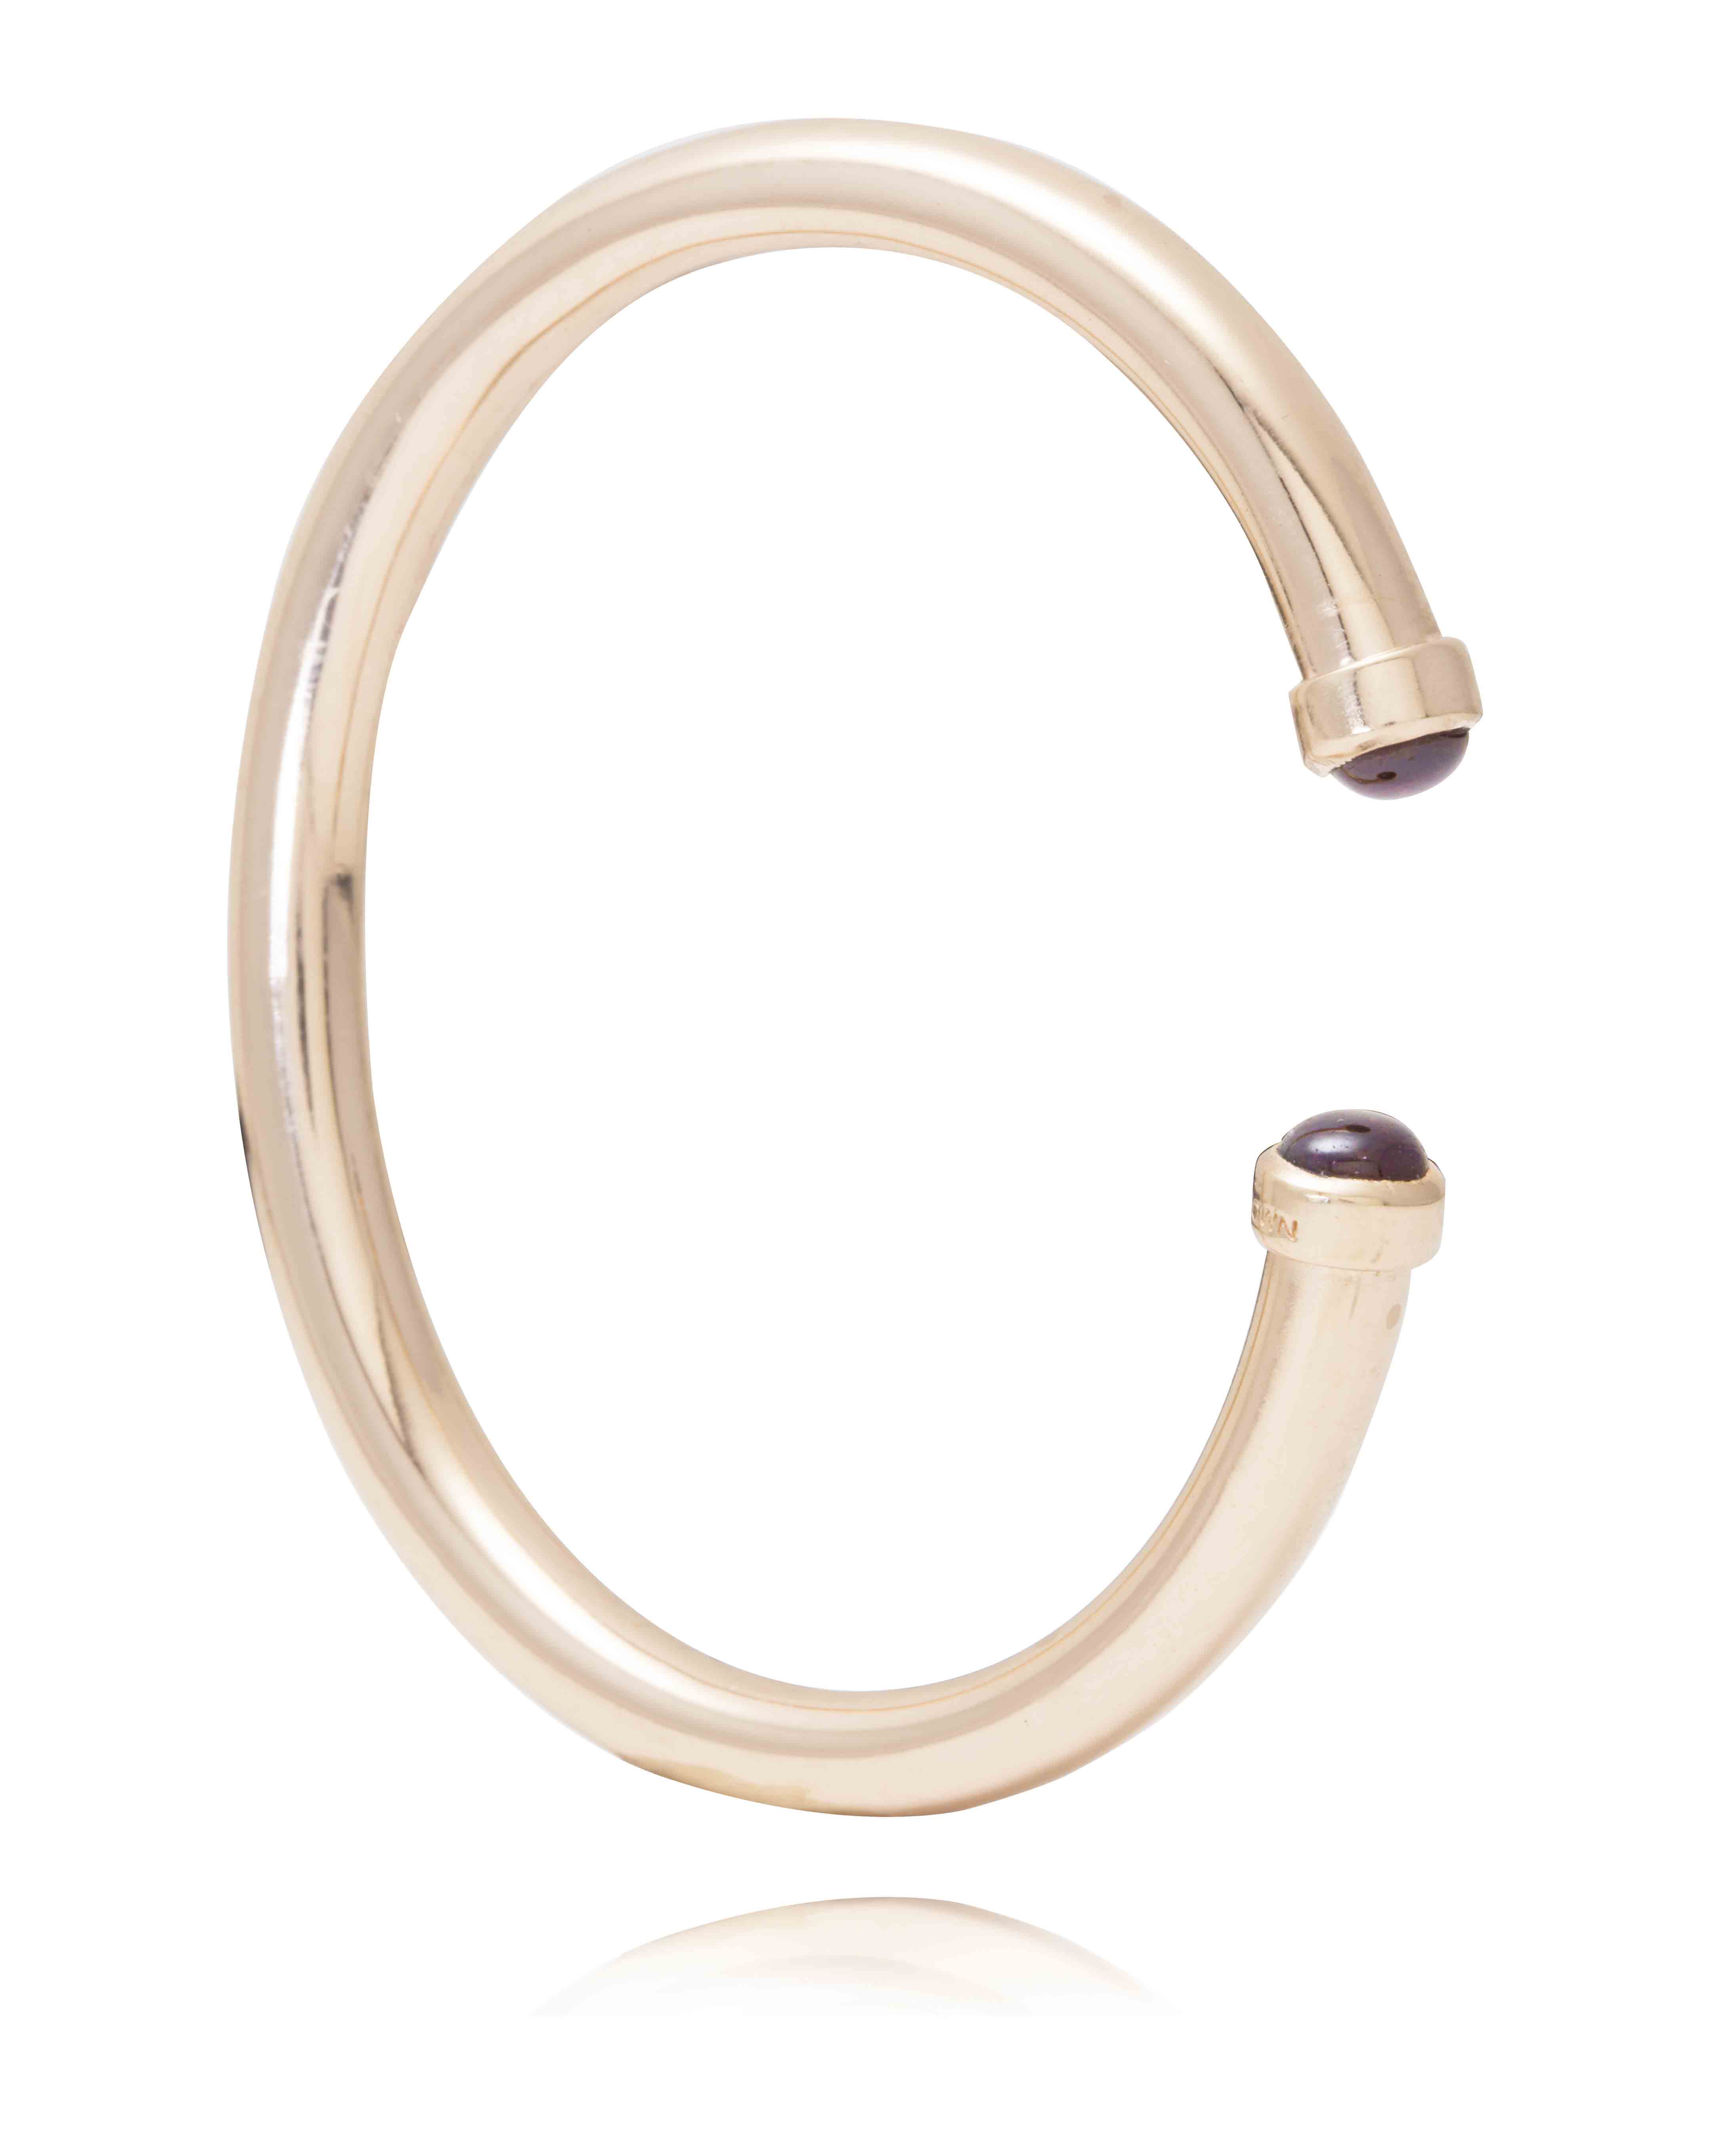 THE BROWNHOUSE INTERIORS Rose Gold Twist Bangle with Garnet Cabochon